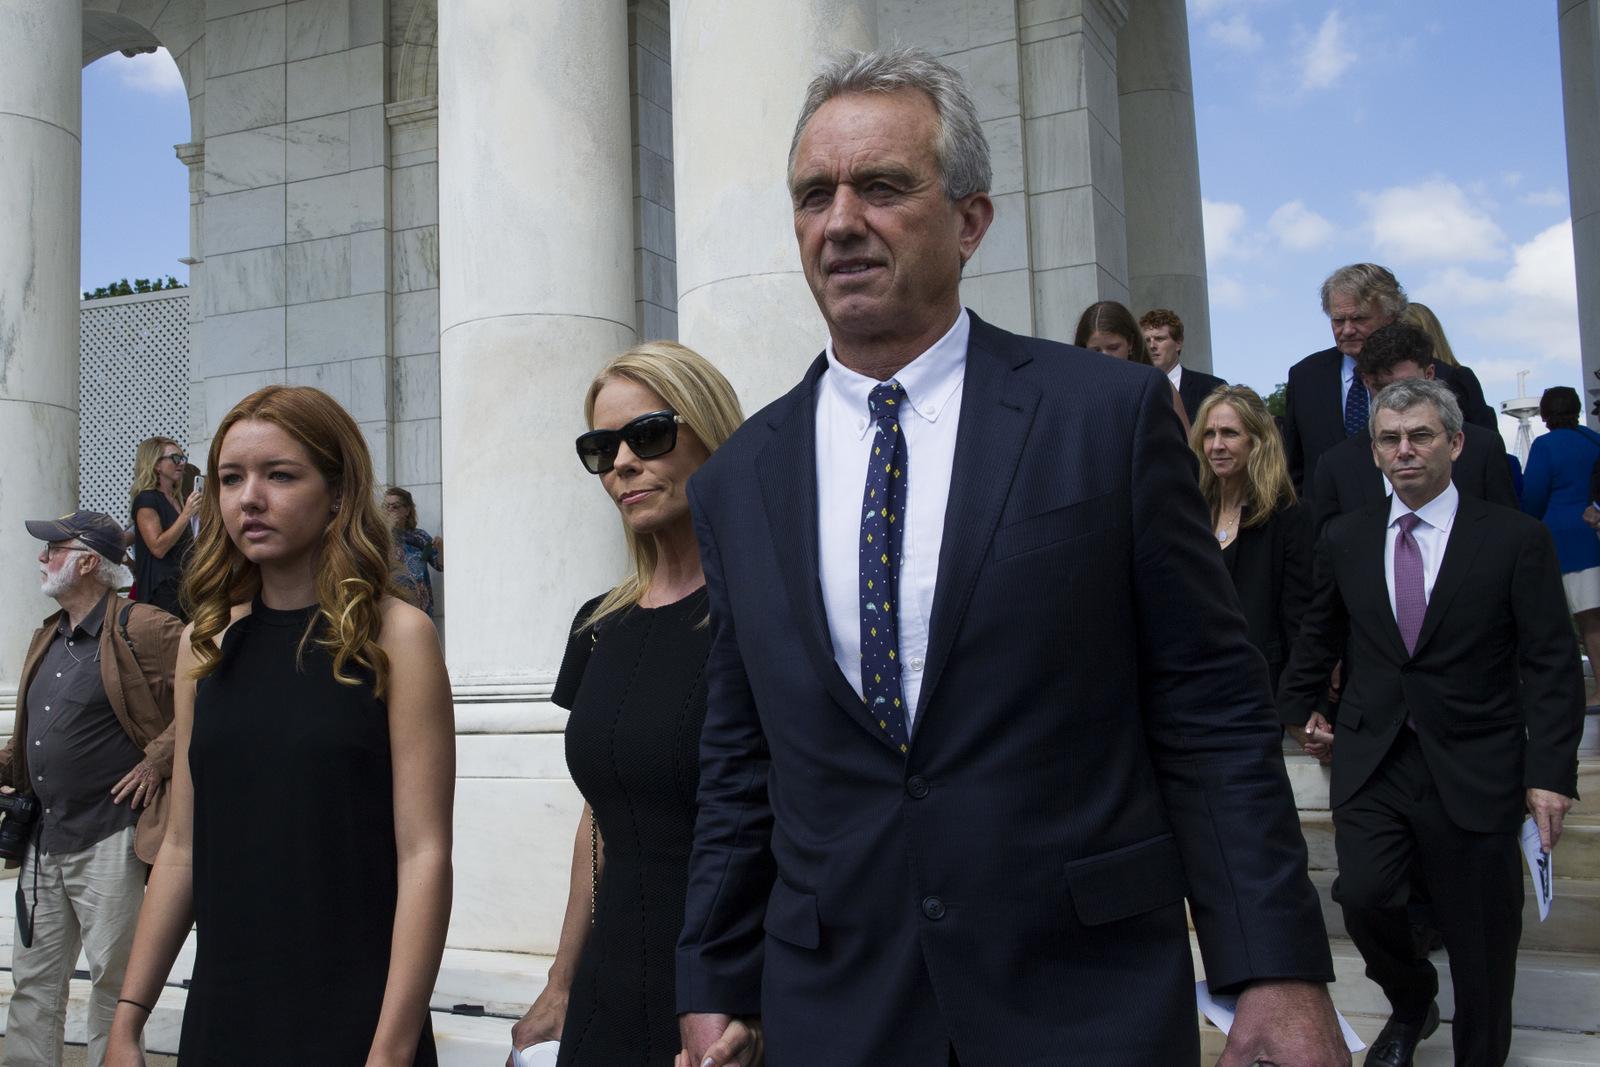 Robert F. Kennedy, Jr. arrives for the Celebration of the Life of Robert F. Kennedy at Arlington National Cemetery, June 6, 2018. Cliff Owen | AP